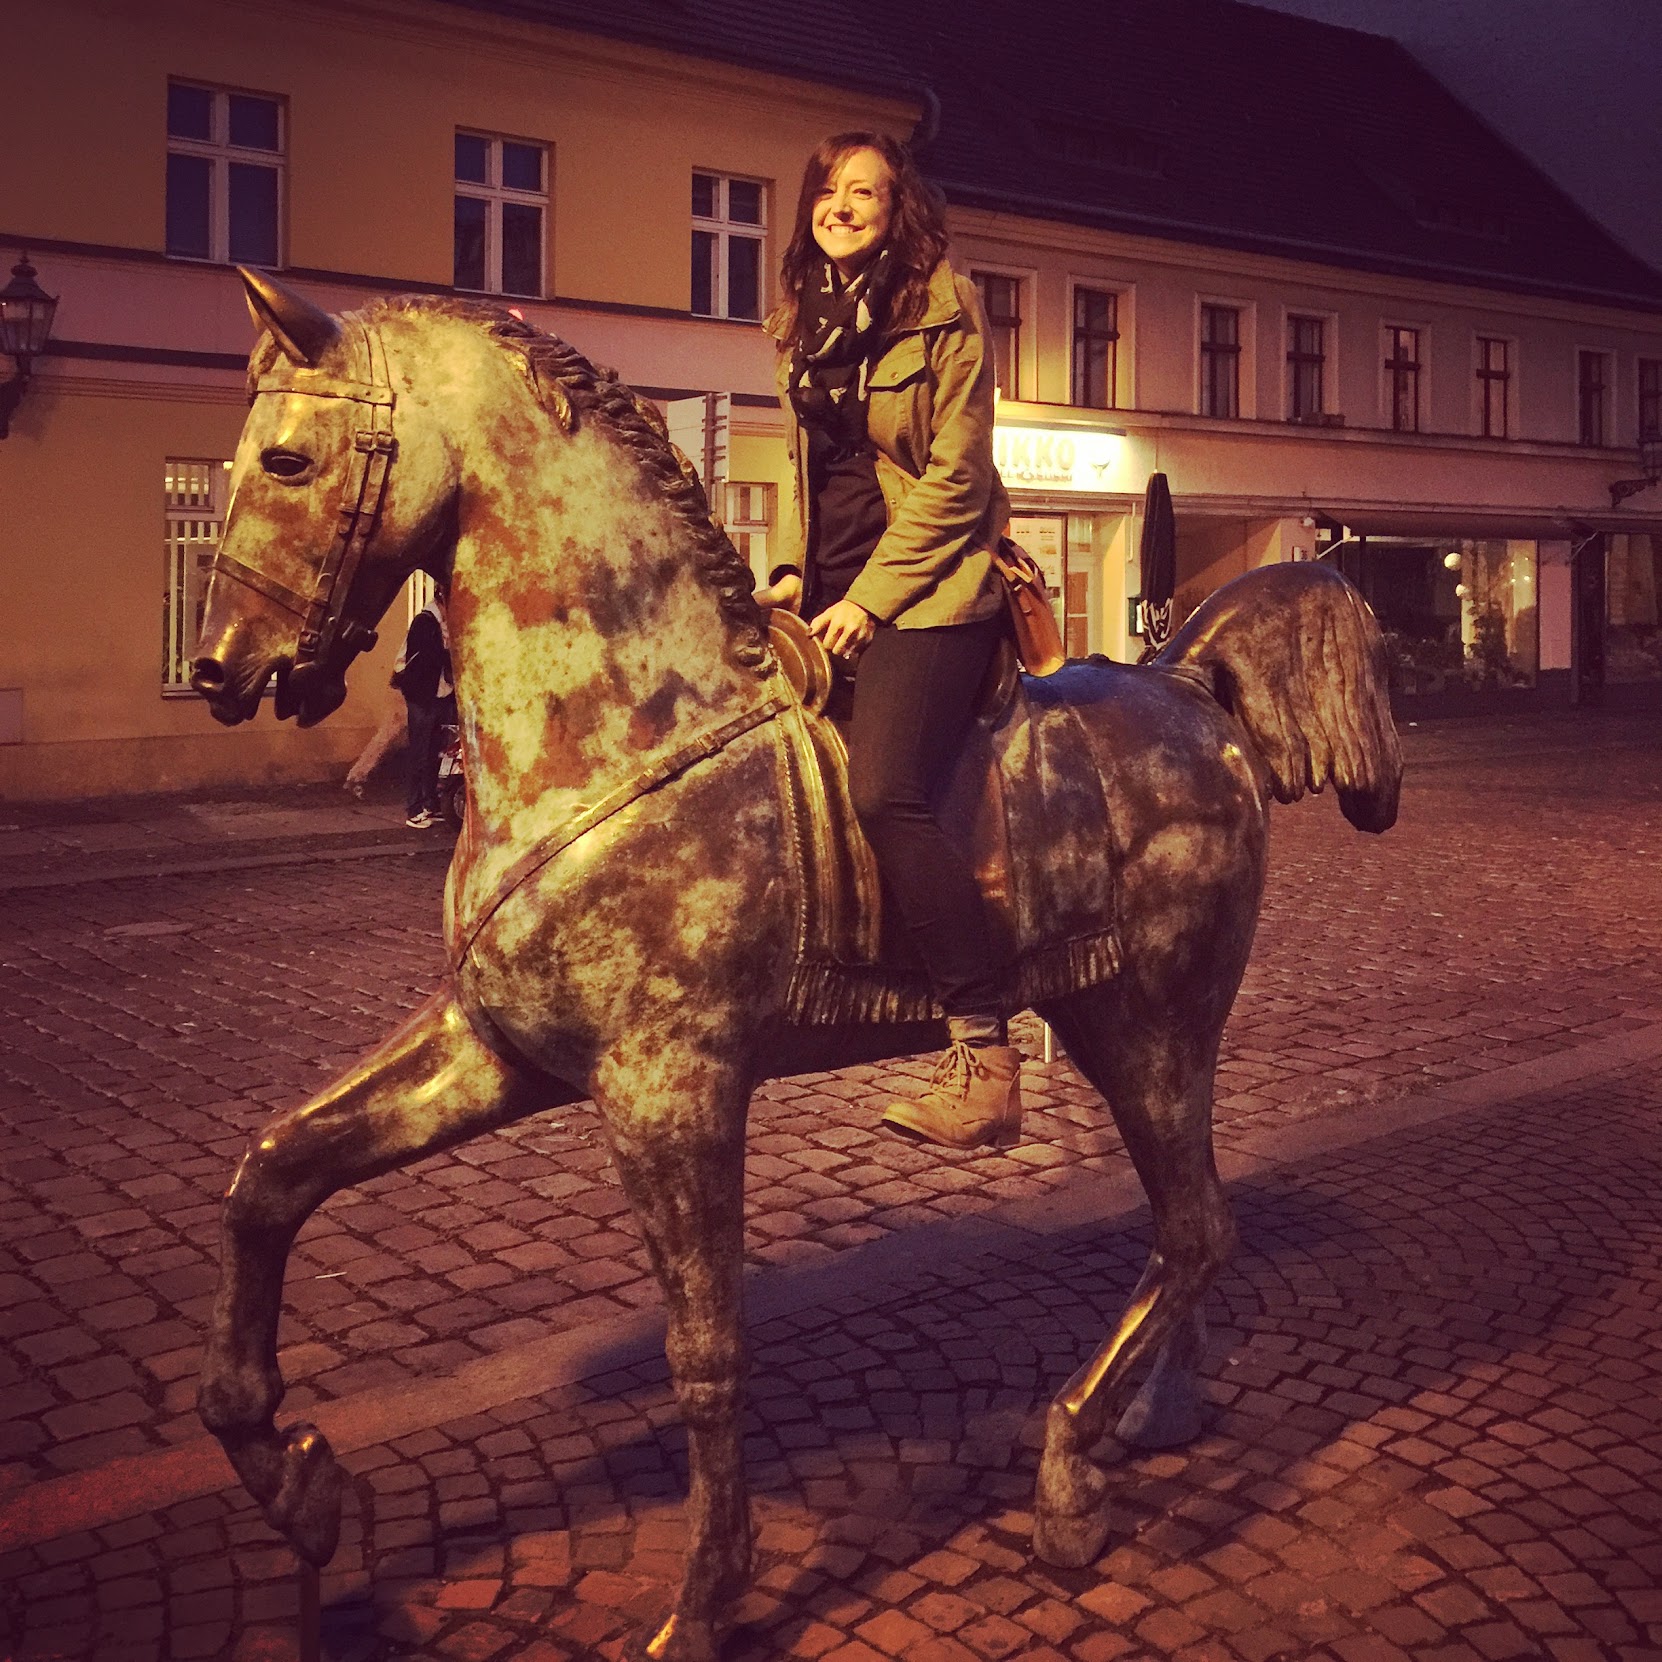 Sitting on the horse